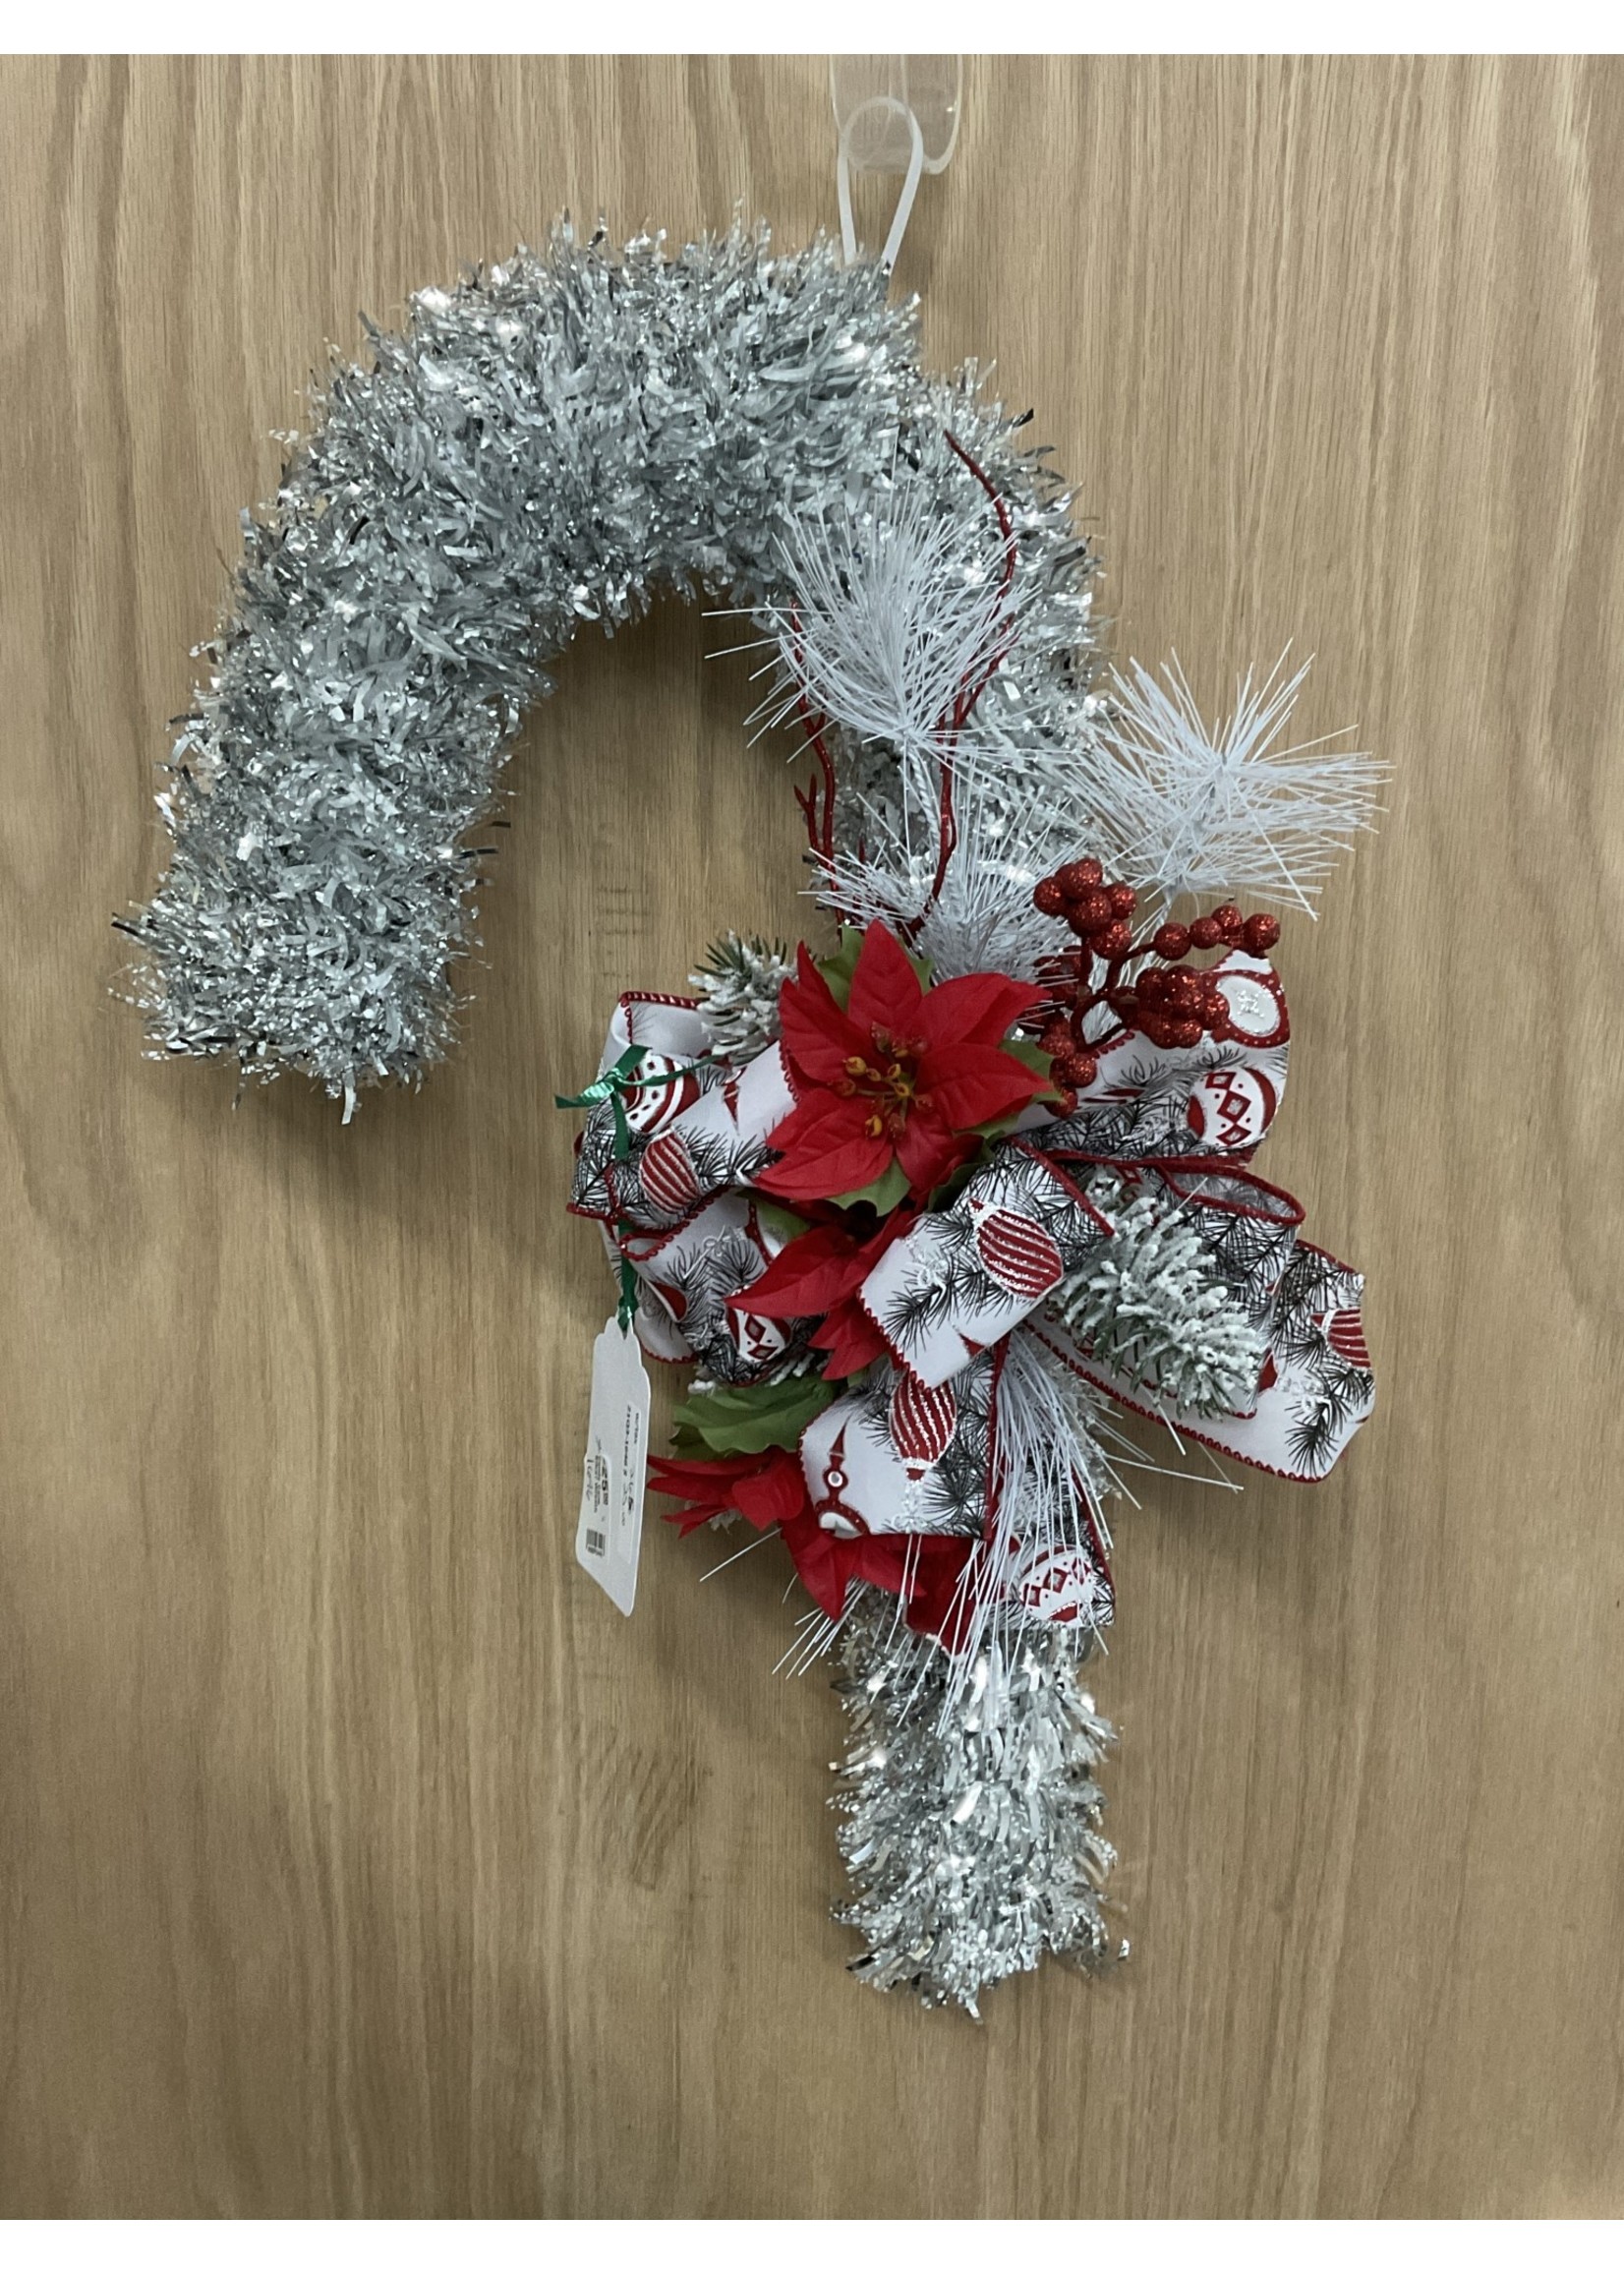 My New Favorite Thing Wreath Candy Cane Silver Tinsel with Poinsettia and Red Ornament Ribbon